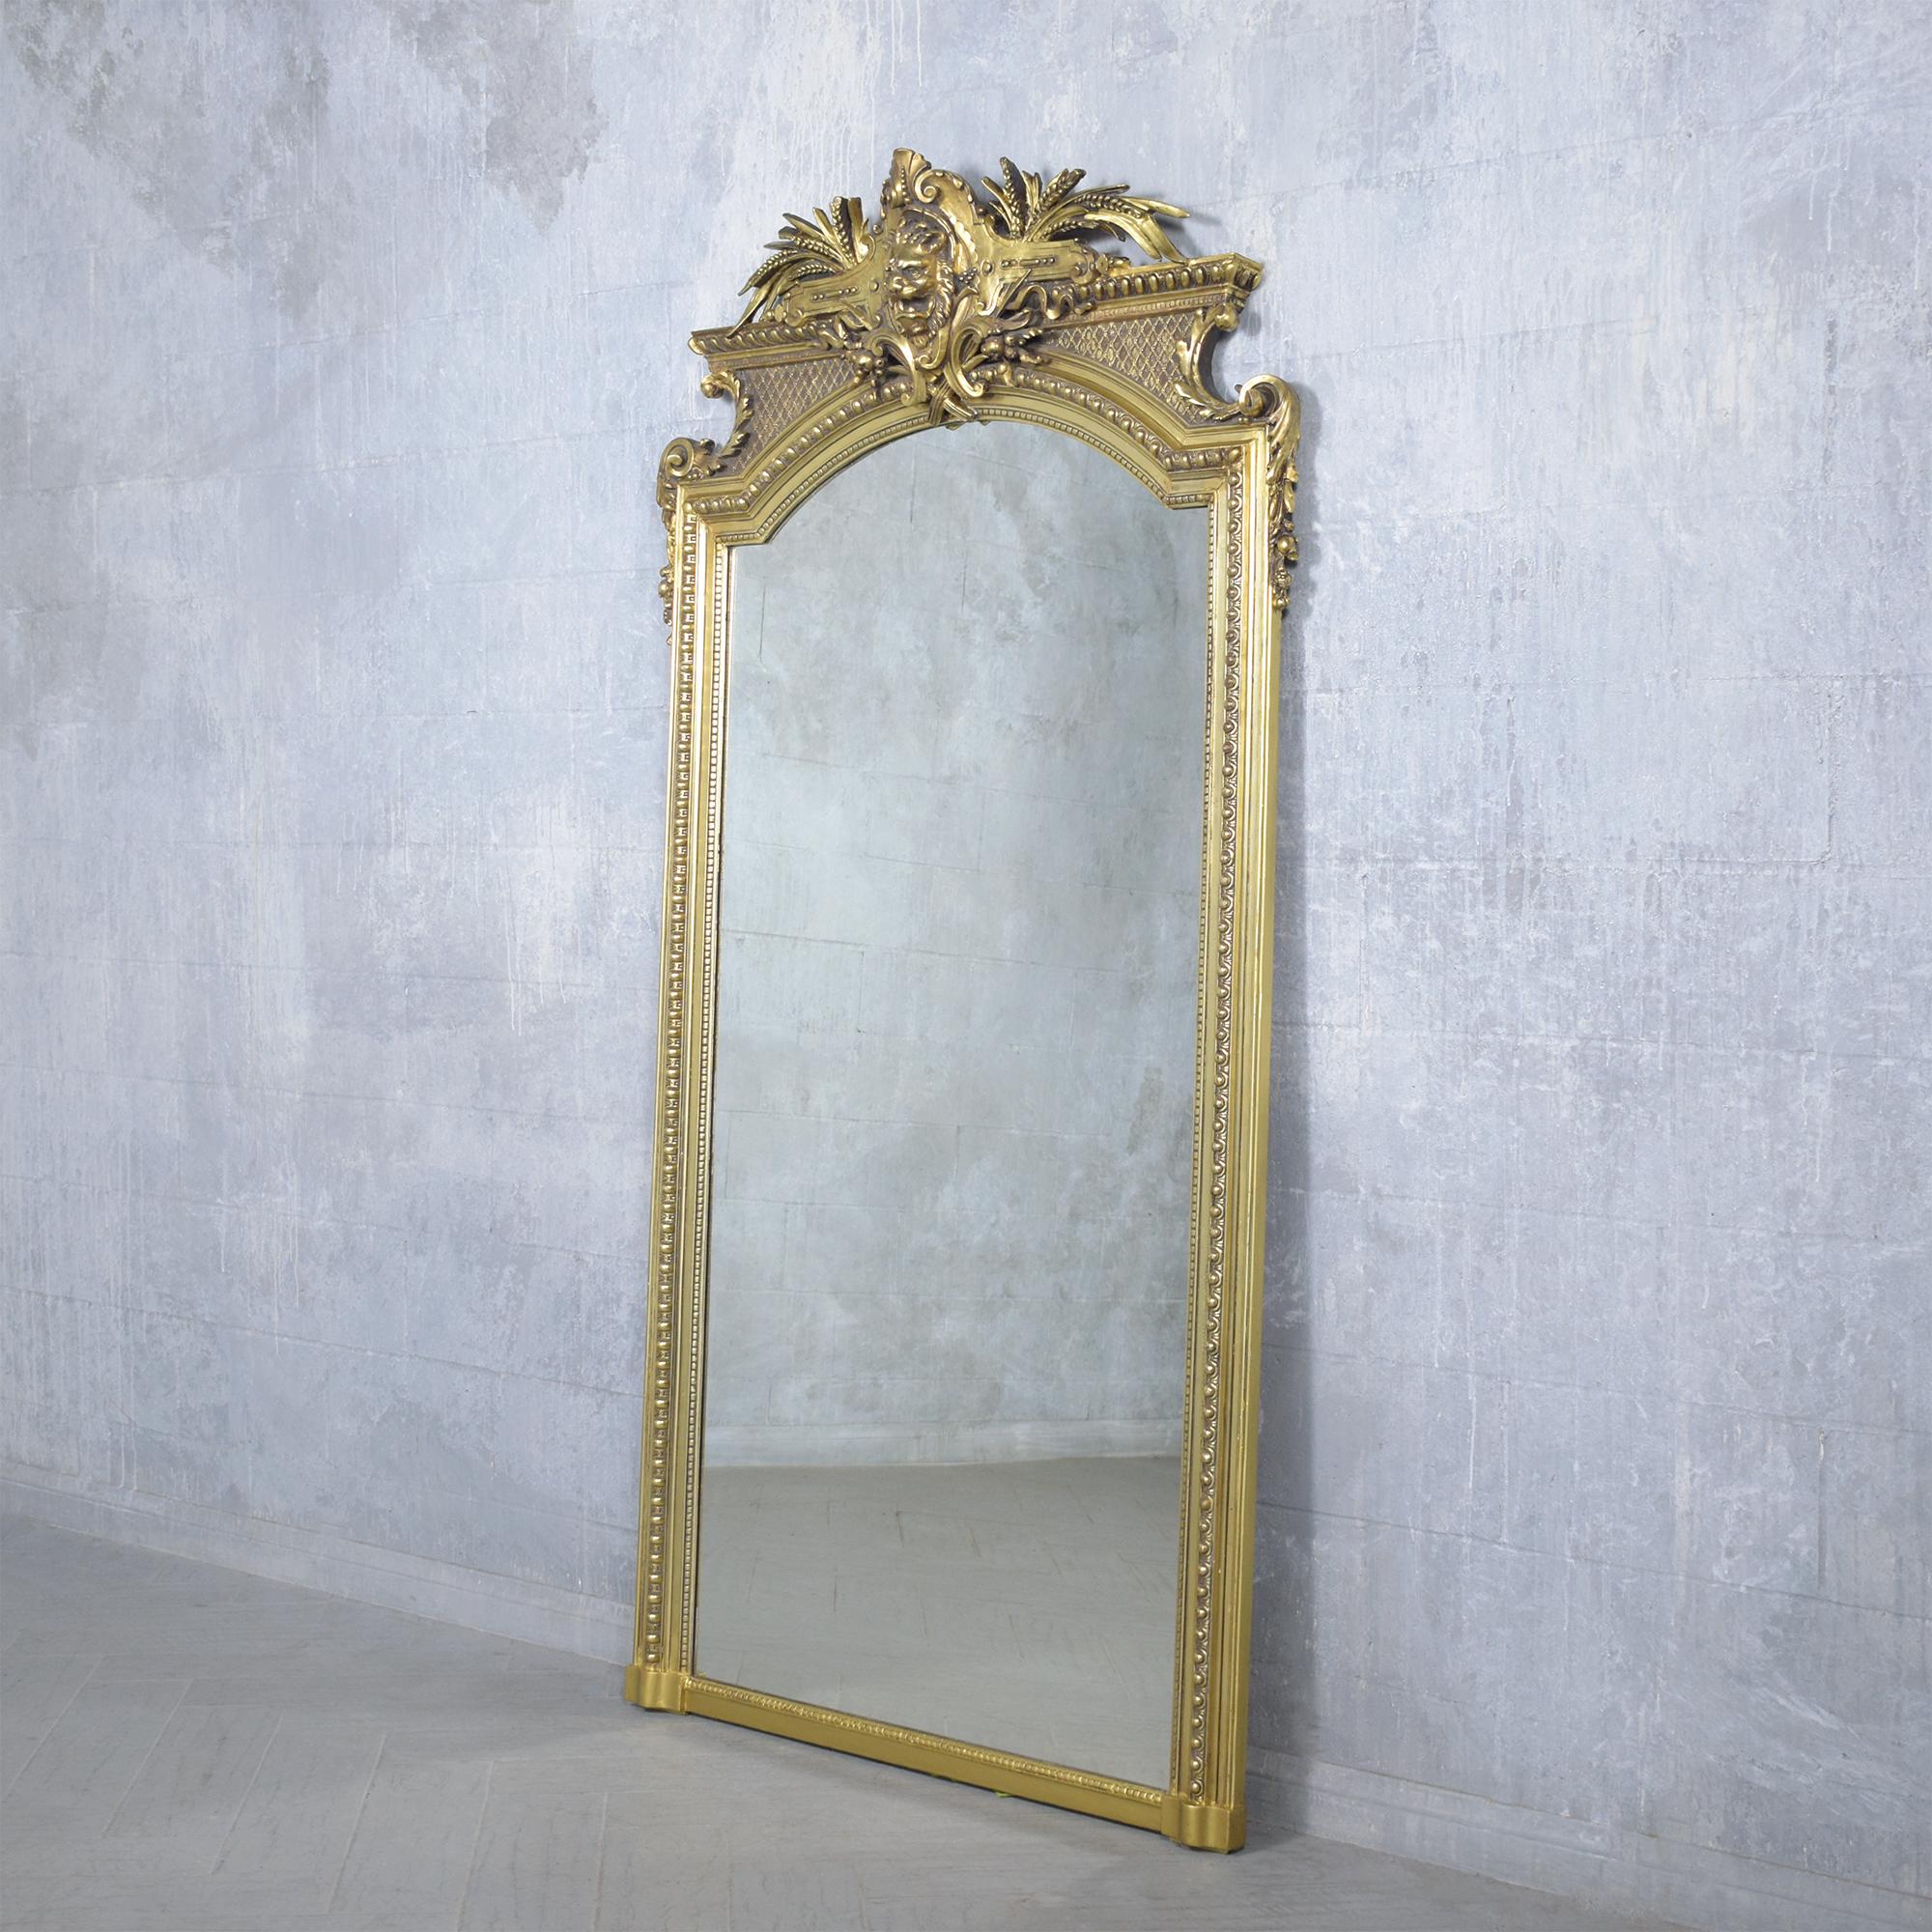 Renaissance Late 19th-Century French Giltwood Standing Mirror: Restored Elegance For Sale